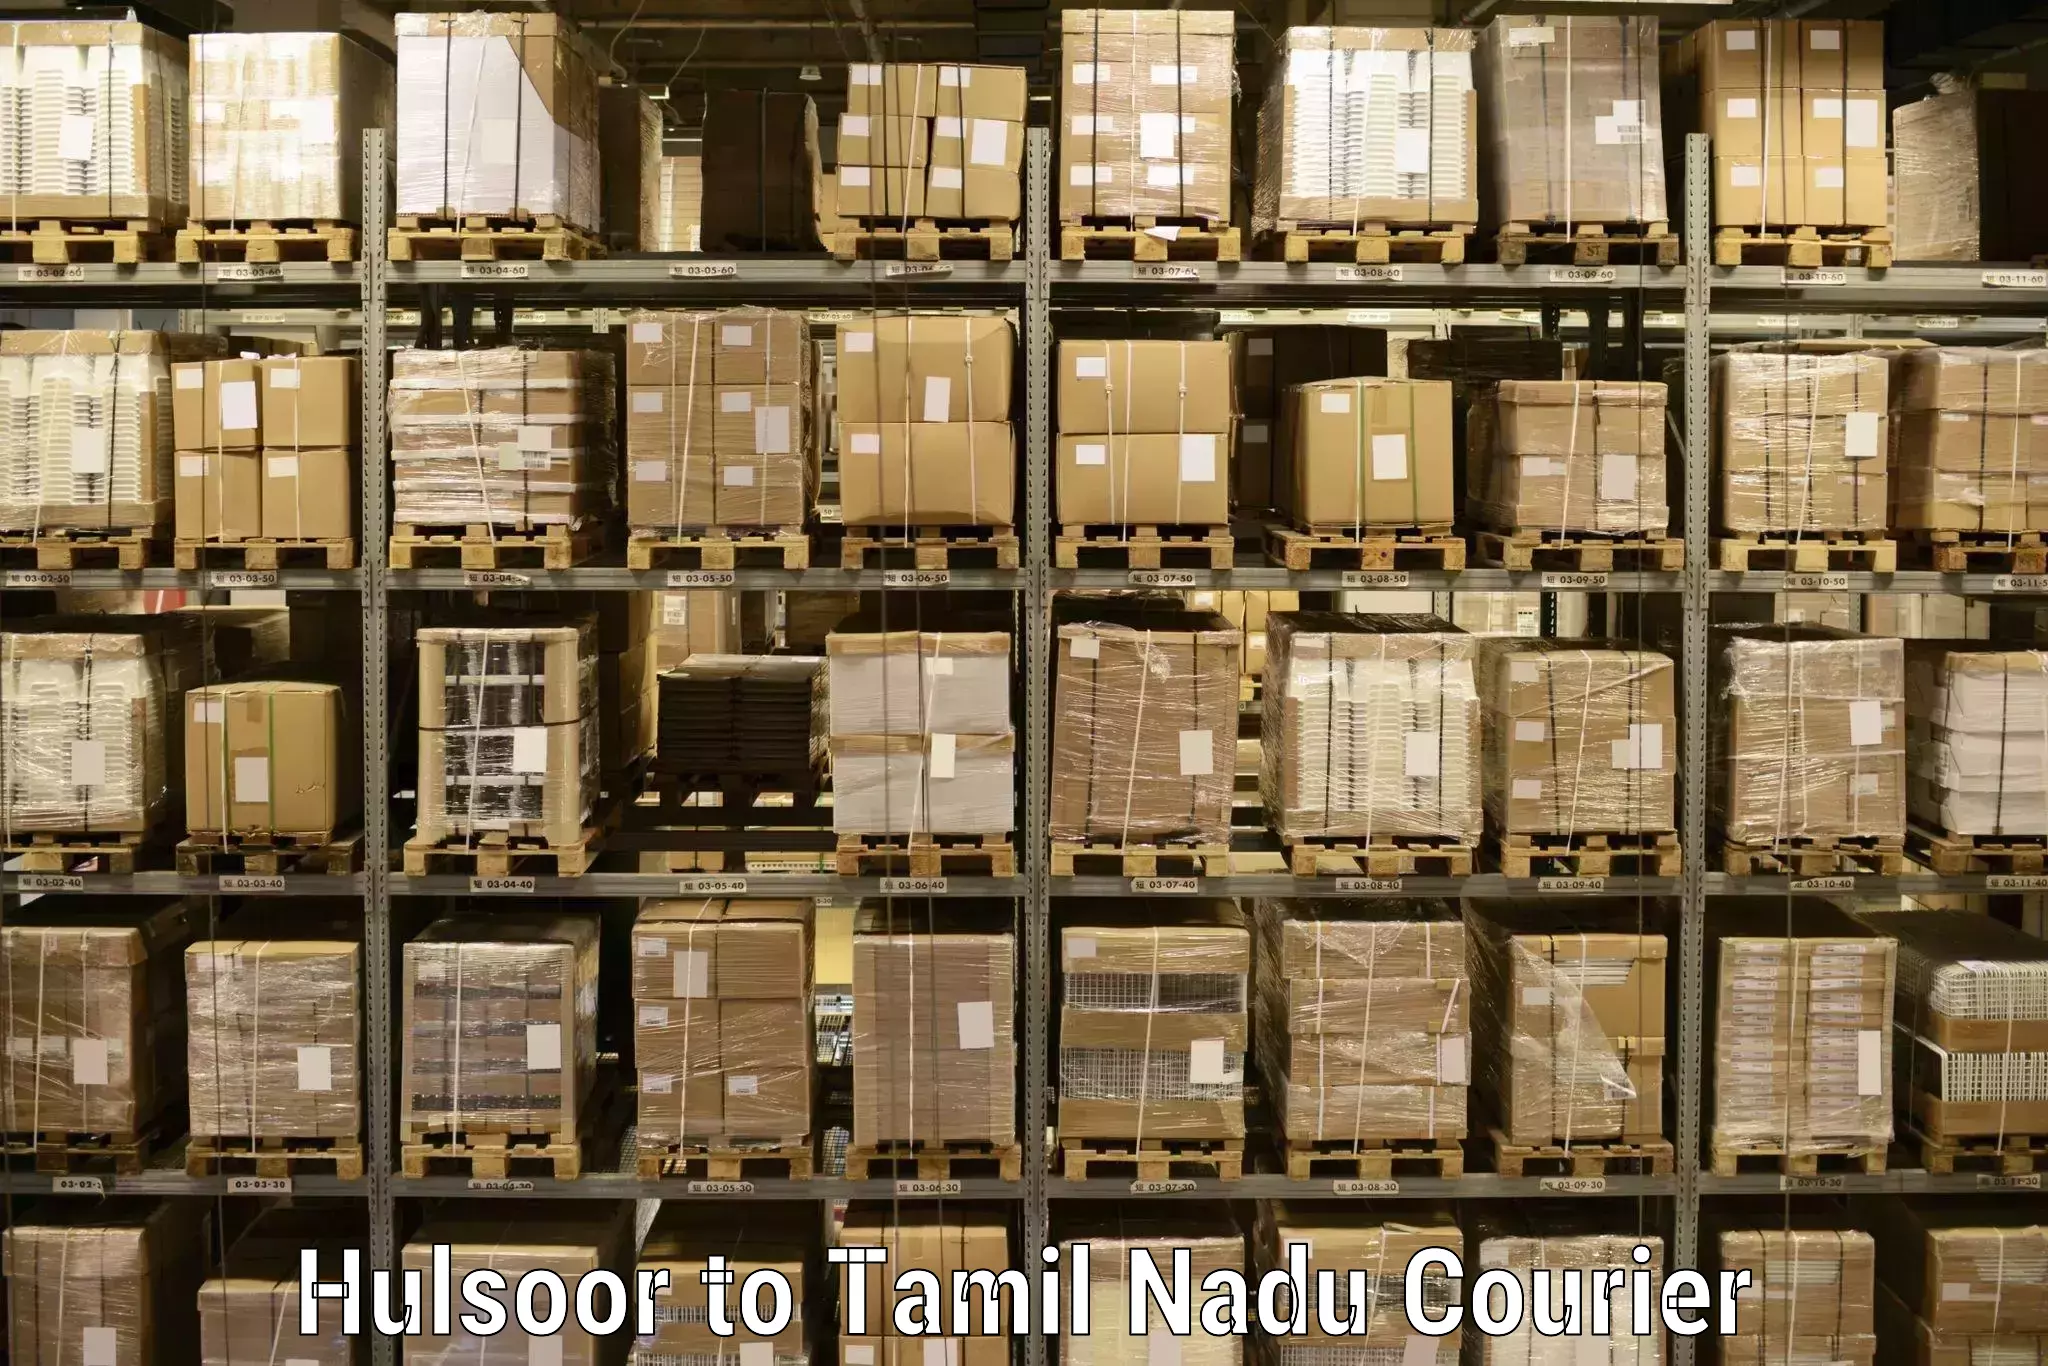 Full-service courier options Hulsoor to Hosur